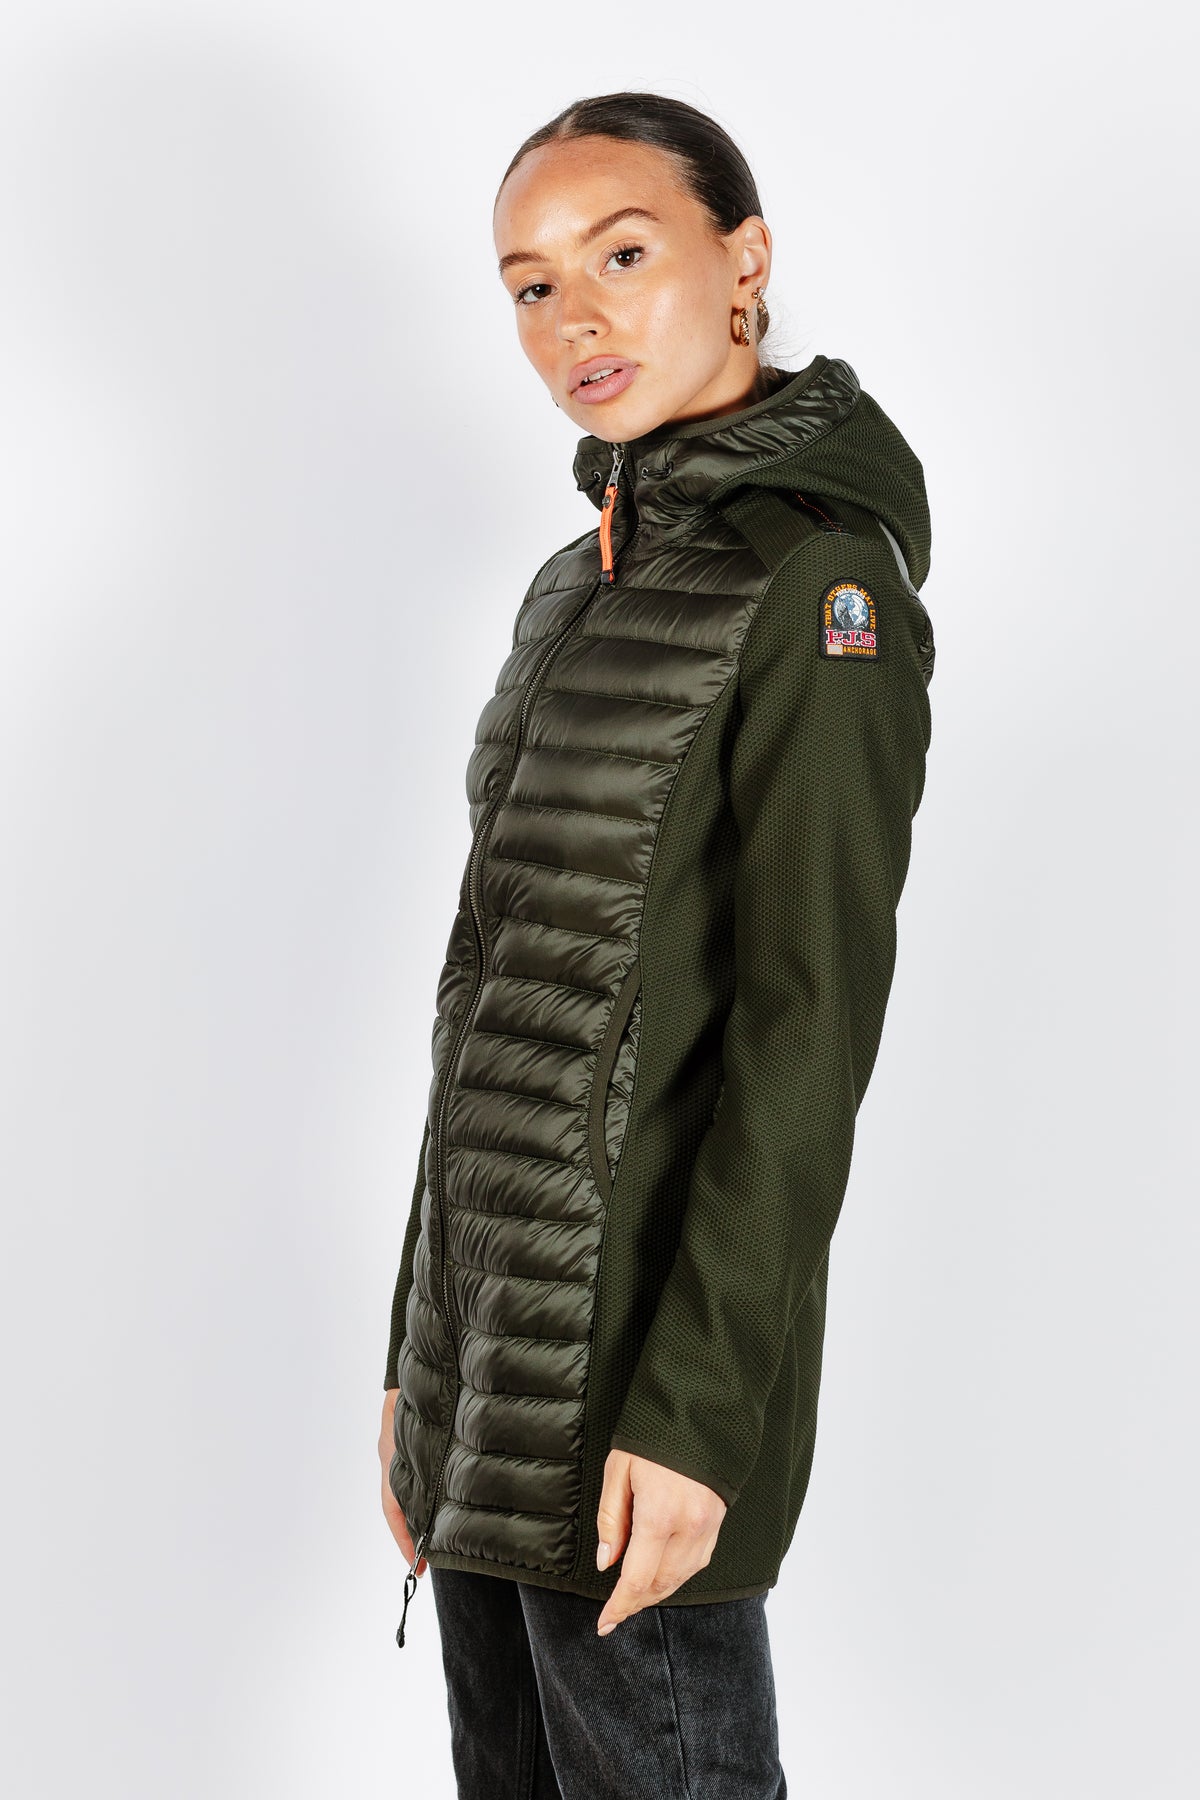 PARAJUMPERS ROBYN in Sycamore – The 